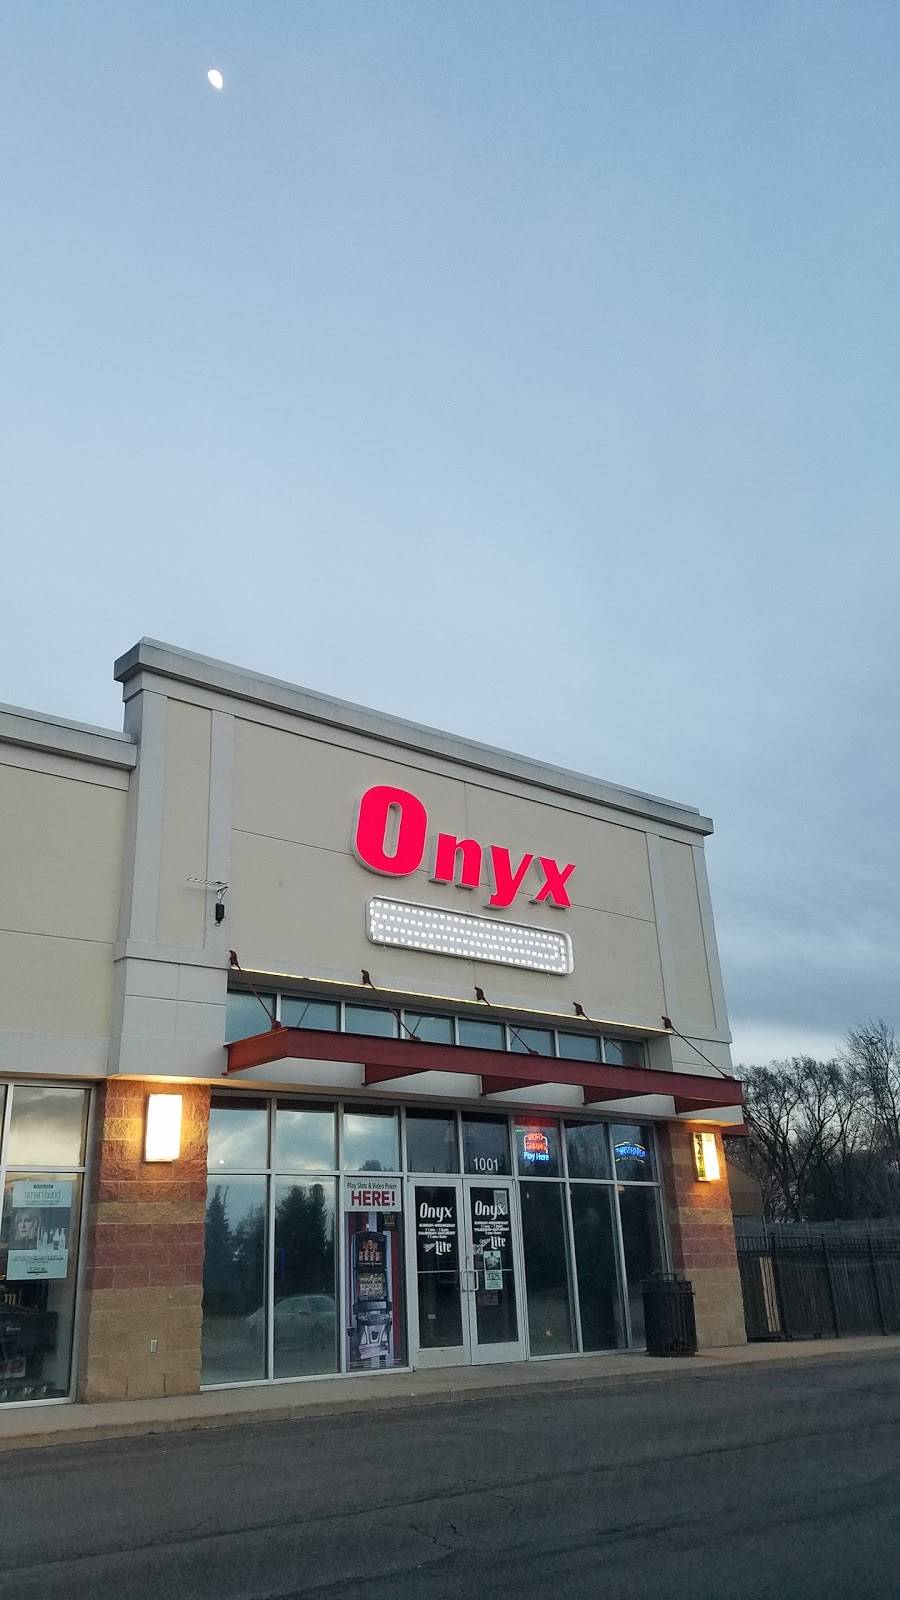 Onyx Bar and Grill | restaurant | 1001 West Lane Rd, Machesney Park, IL 61115, USA | 8159046842 OR +1 815-904-6842